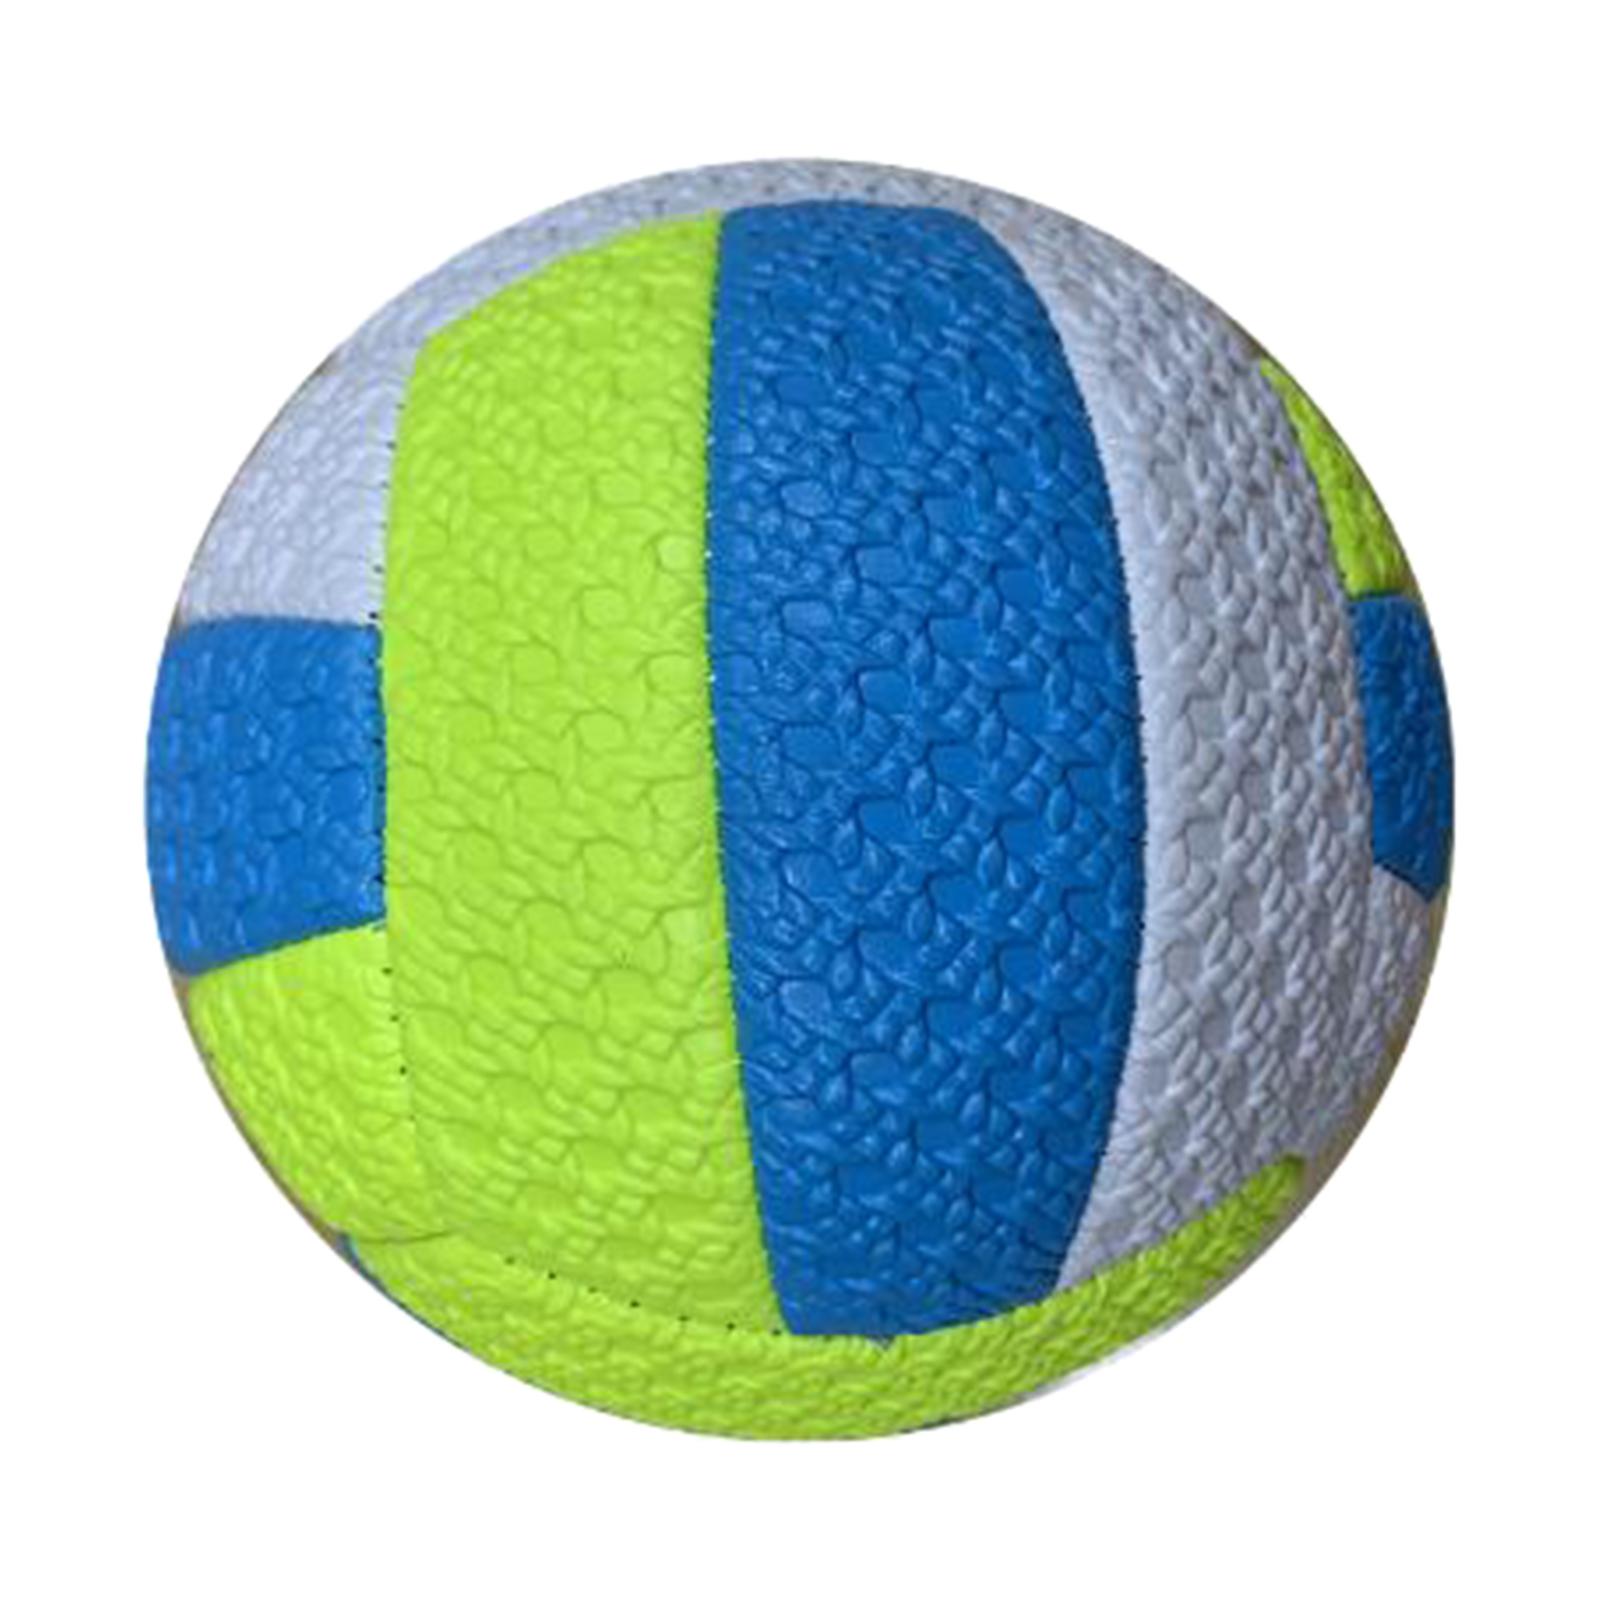 Professional Volleyball Size 2, Volley Ball for Toddlers 5.9inch Waterproof Blue